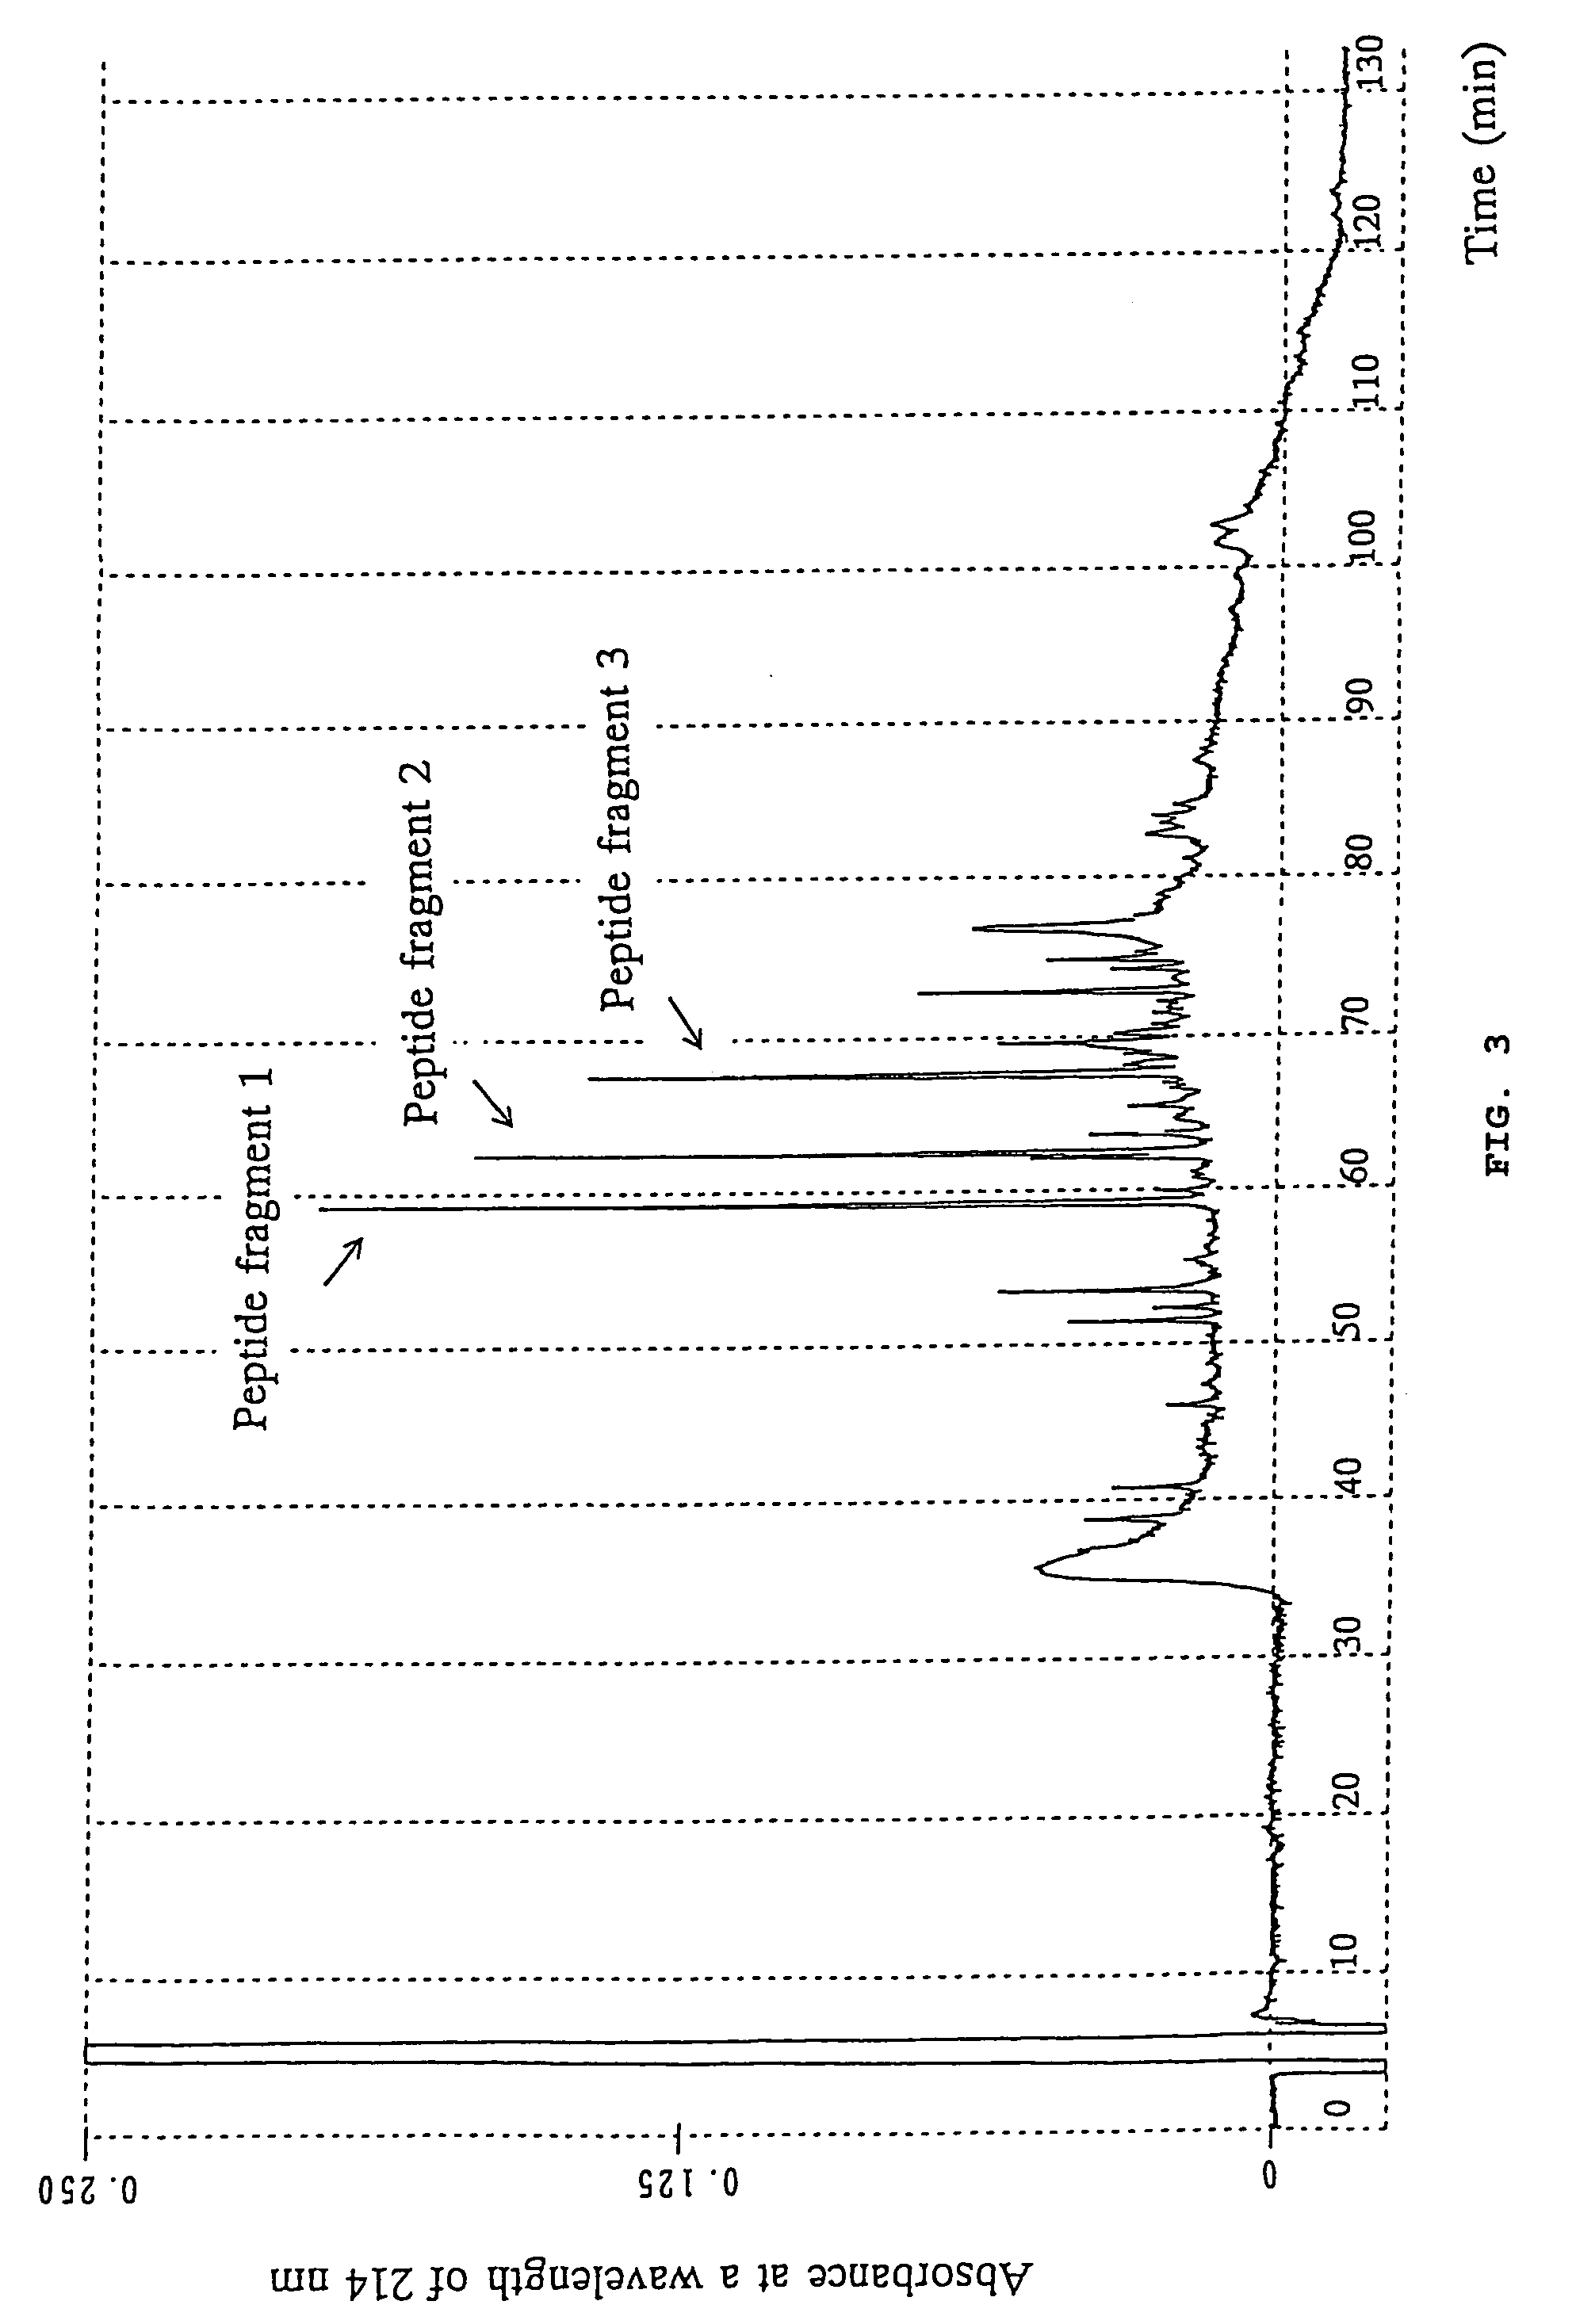 Interferon-γ inducing polypeptide, pharmaceutical composition thereof, monoclonal antibody thereto, and methods of use